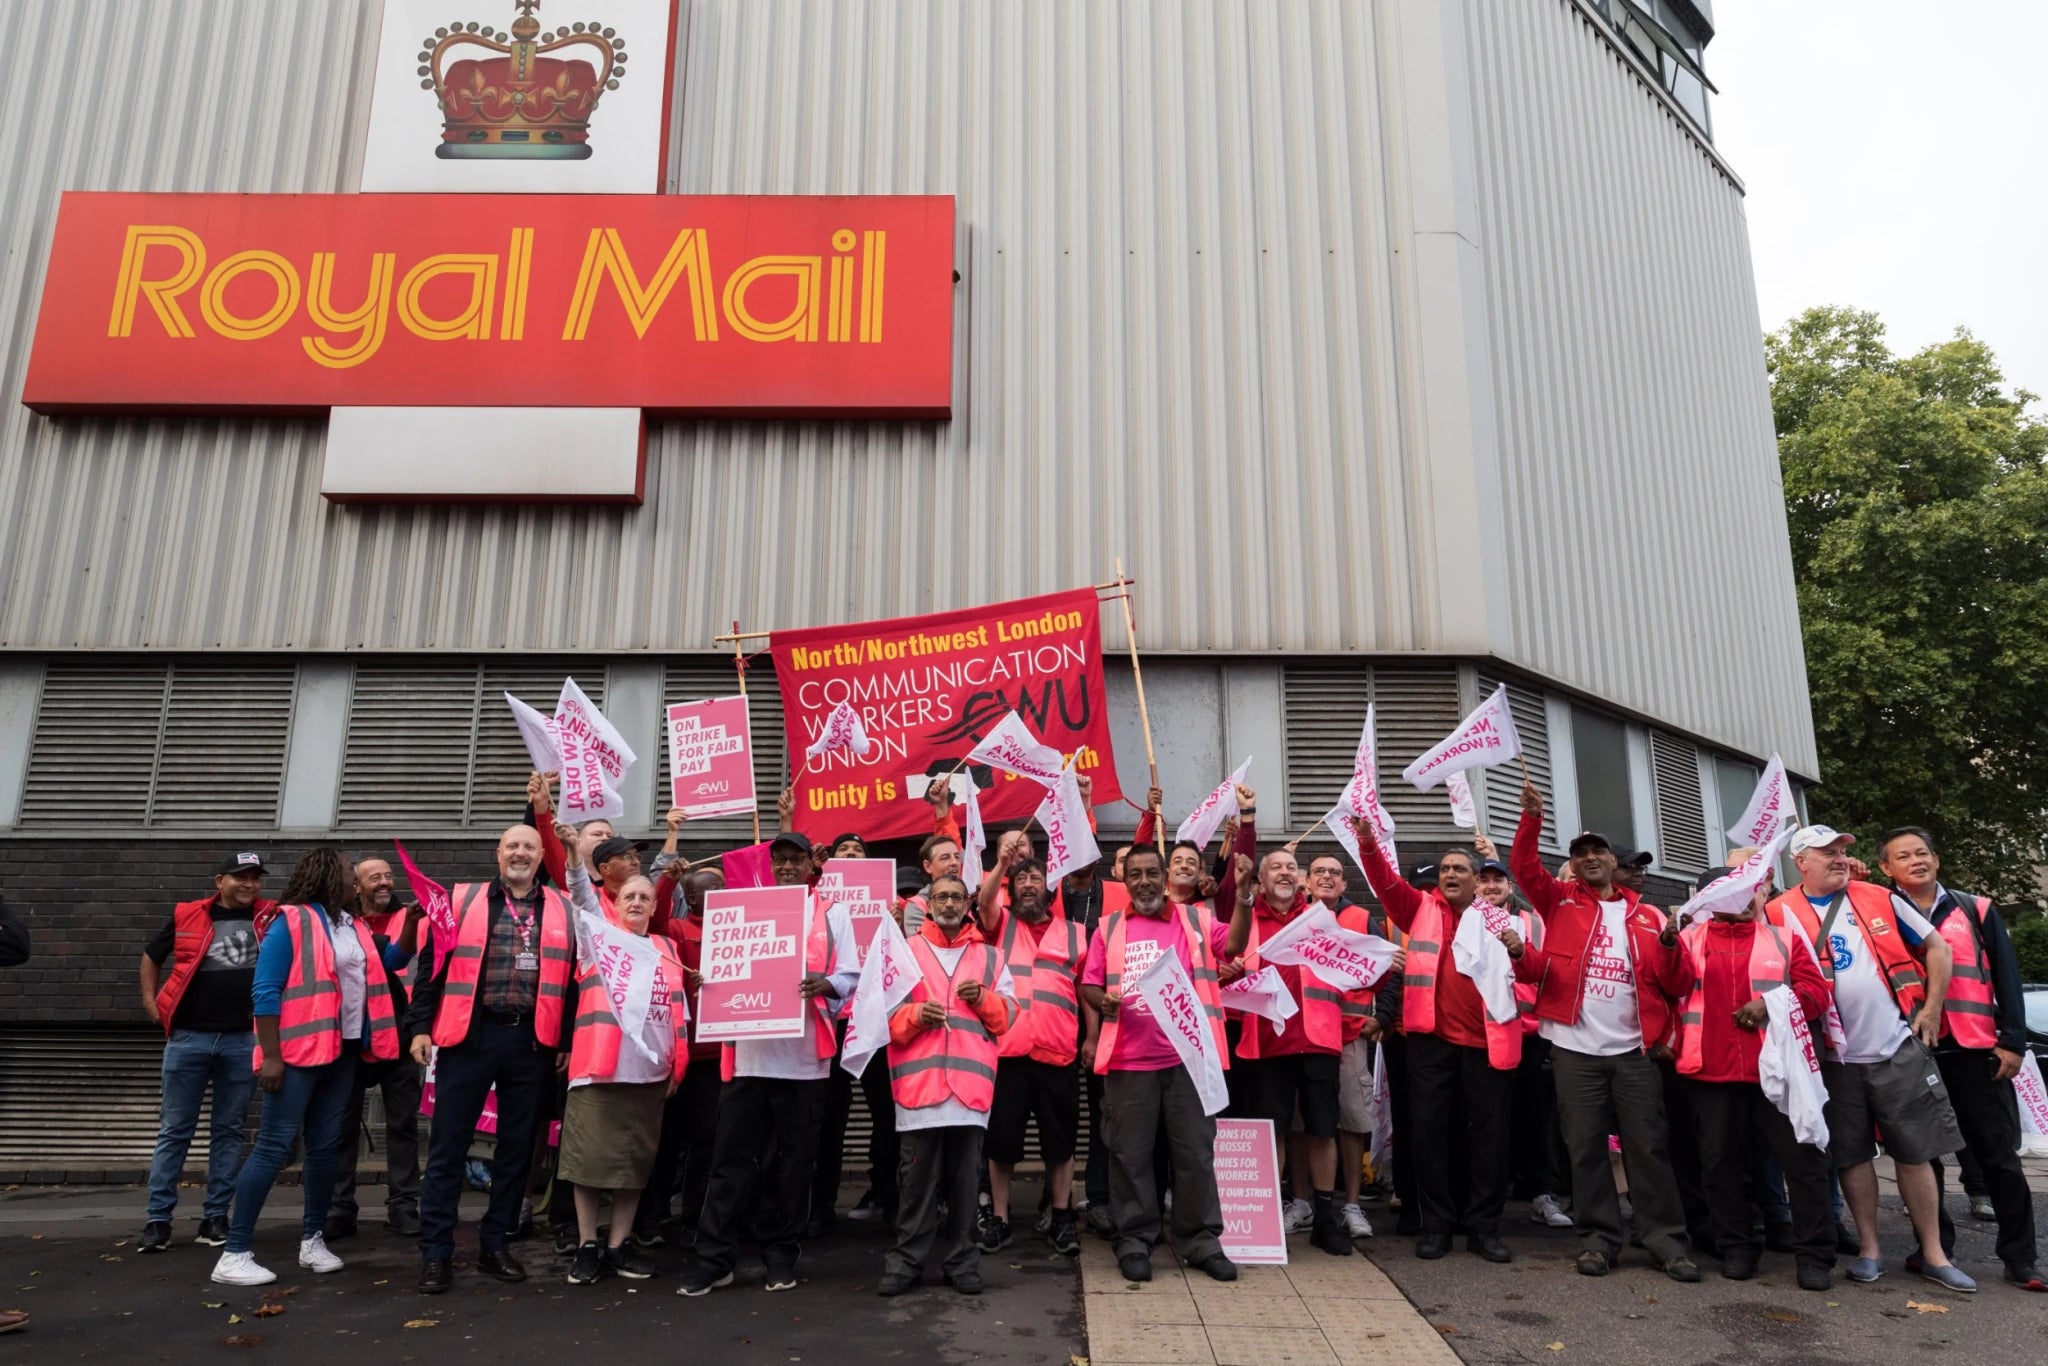 Luvero Update on Royal Mail Strikes